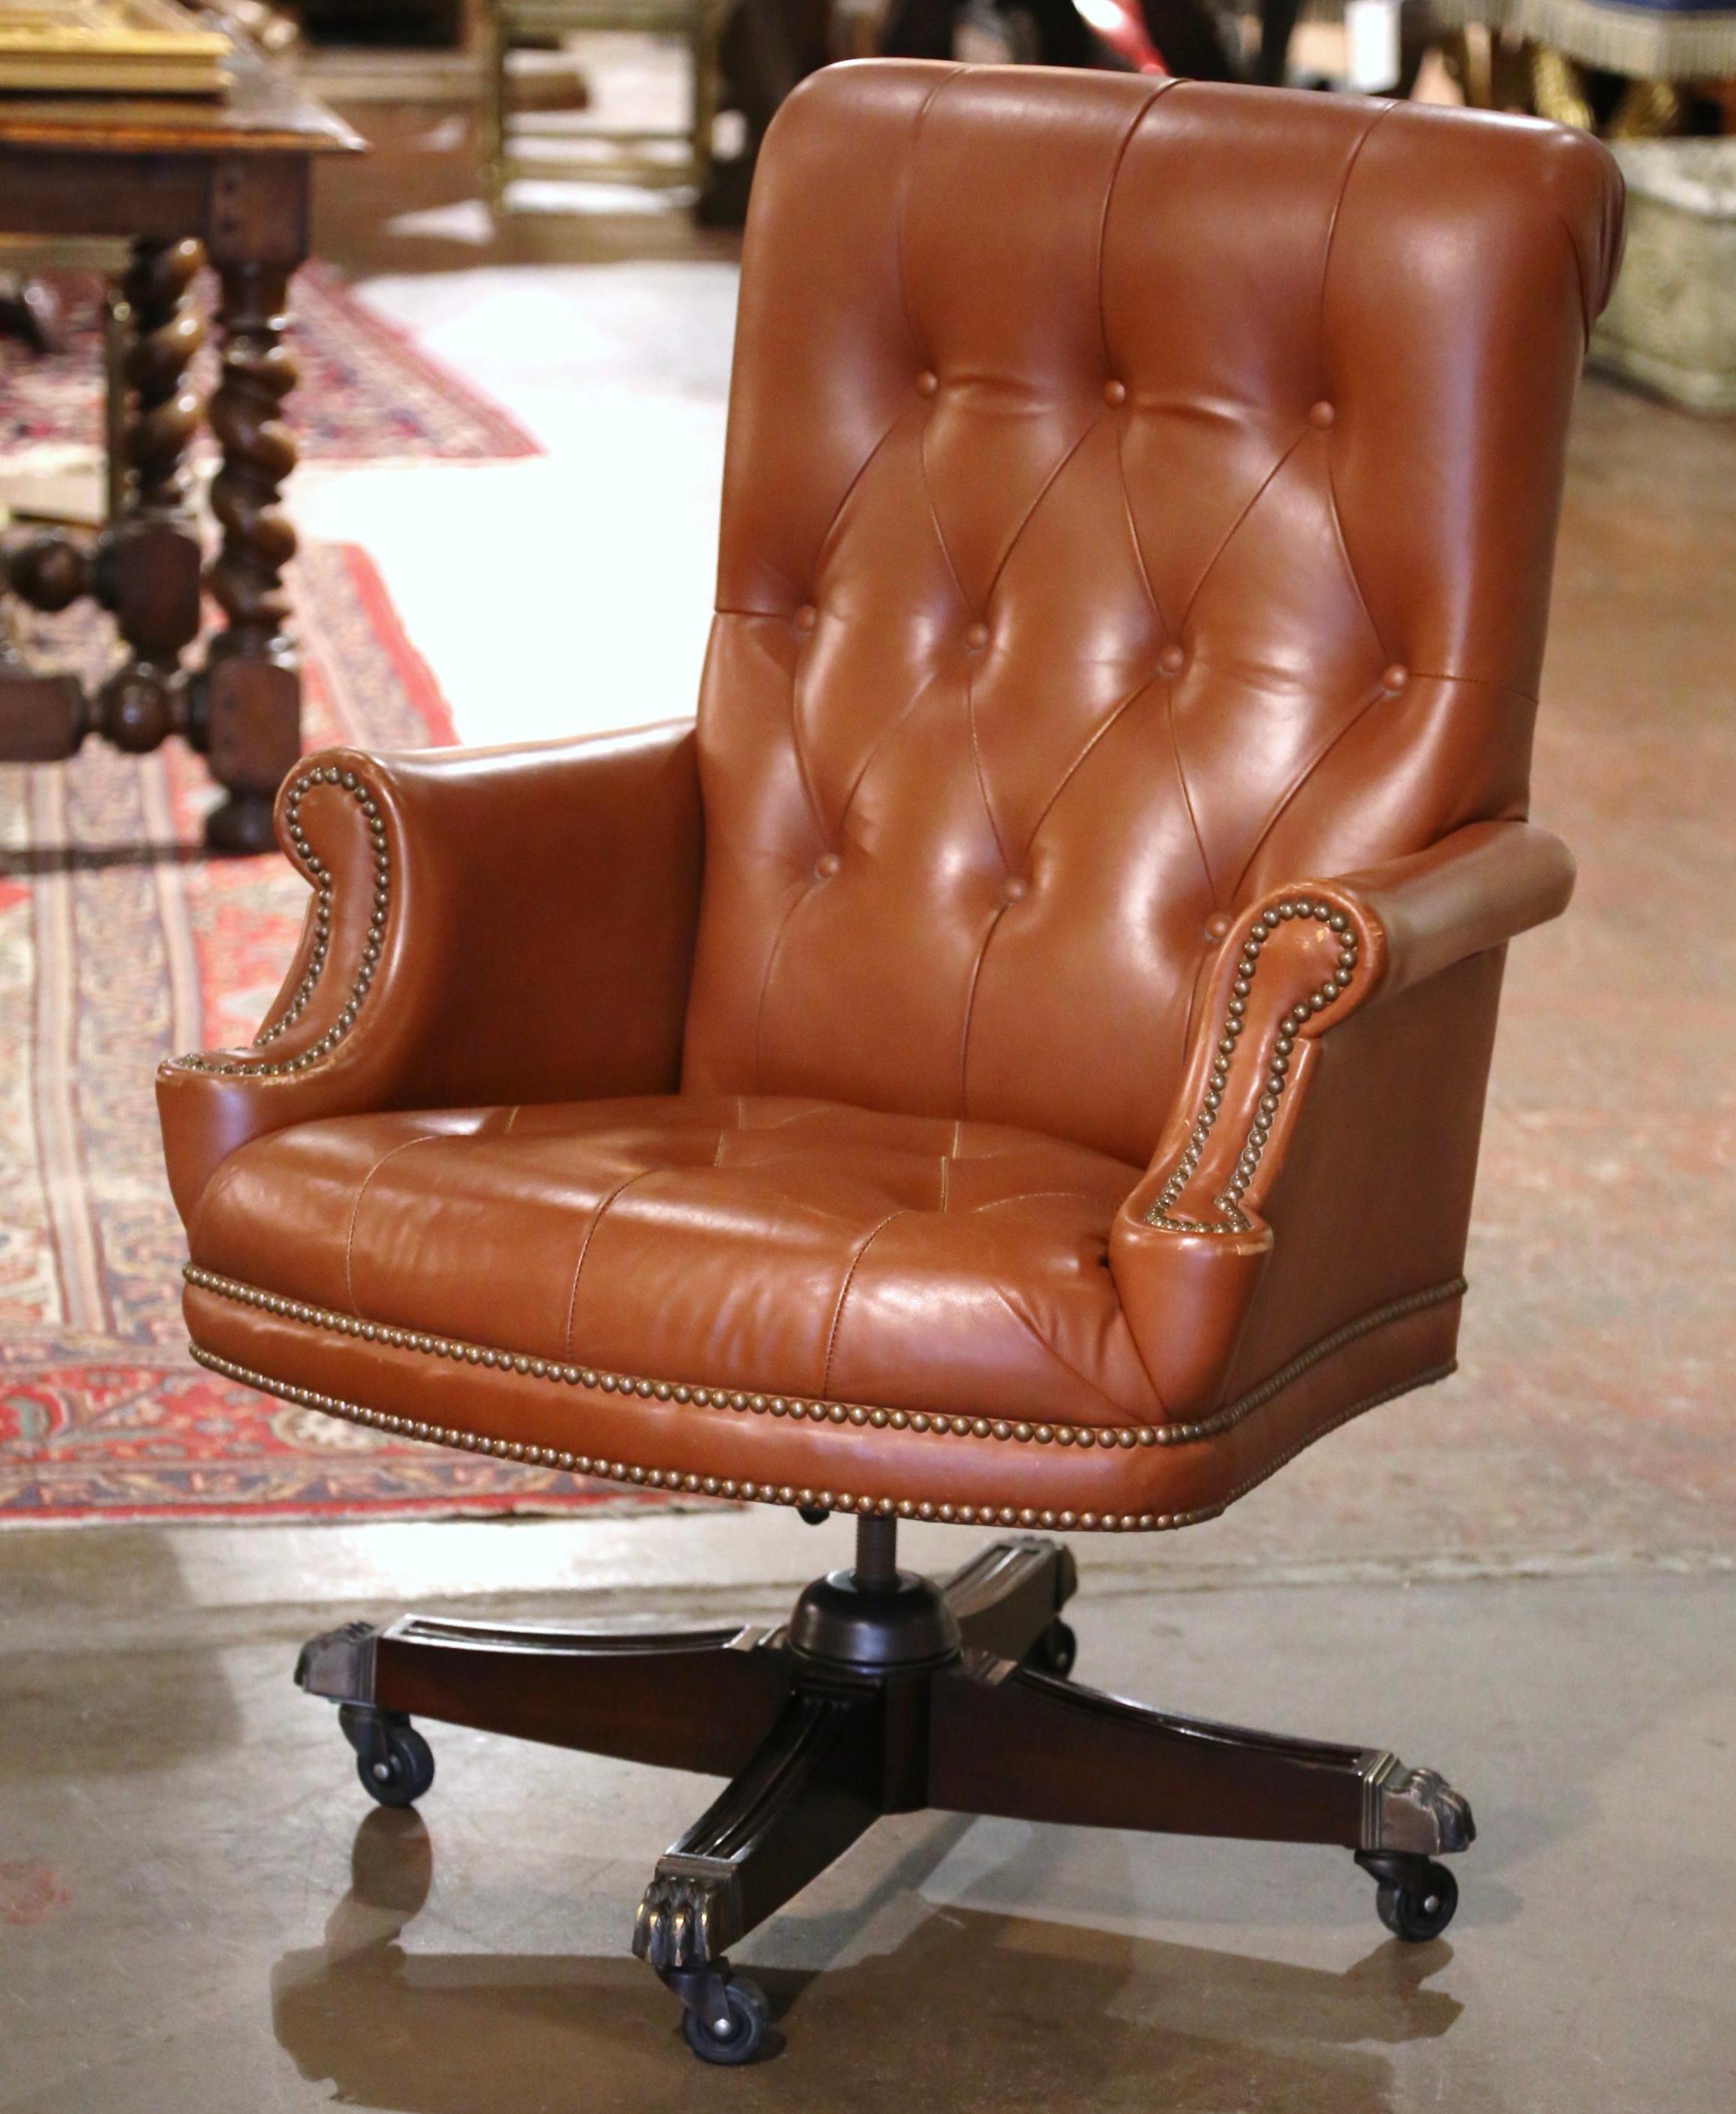 Dress a man's office or study with this elegant vintage armchair. Hand crafted circa 1980 in the Chesterfield style, the chair stands on a swivel base with wooden legs ending in gilt metal casters. The tall chair with rolled arms, rolled back is